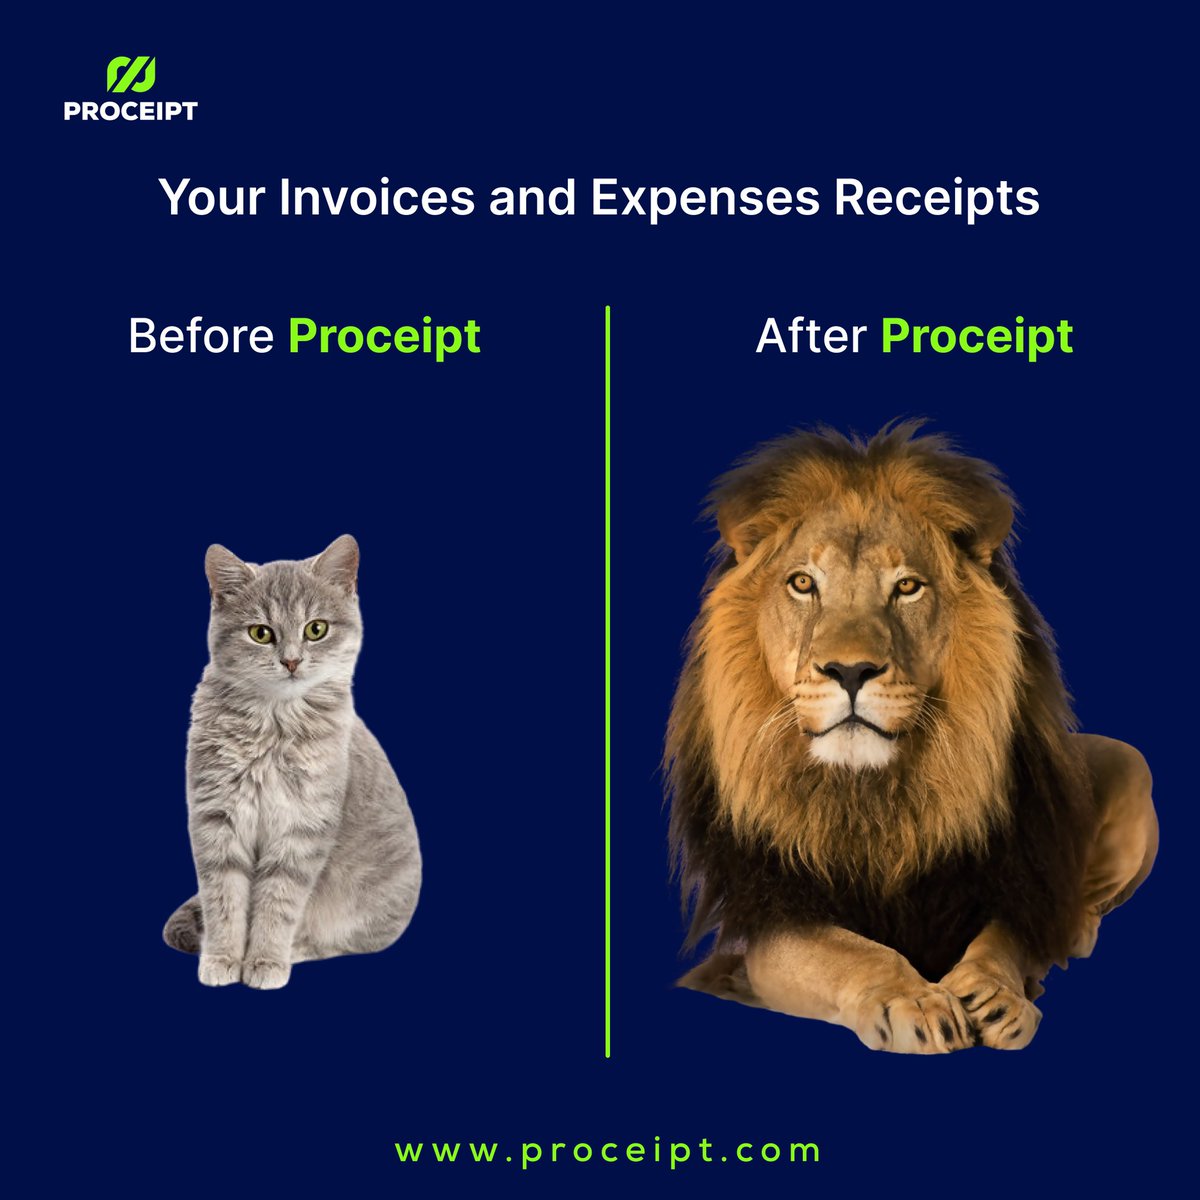 Elevate your financial game with Proceipt's invoicing prowess!

#Proceipt
#digitalBusiness 
#invoicing